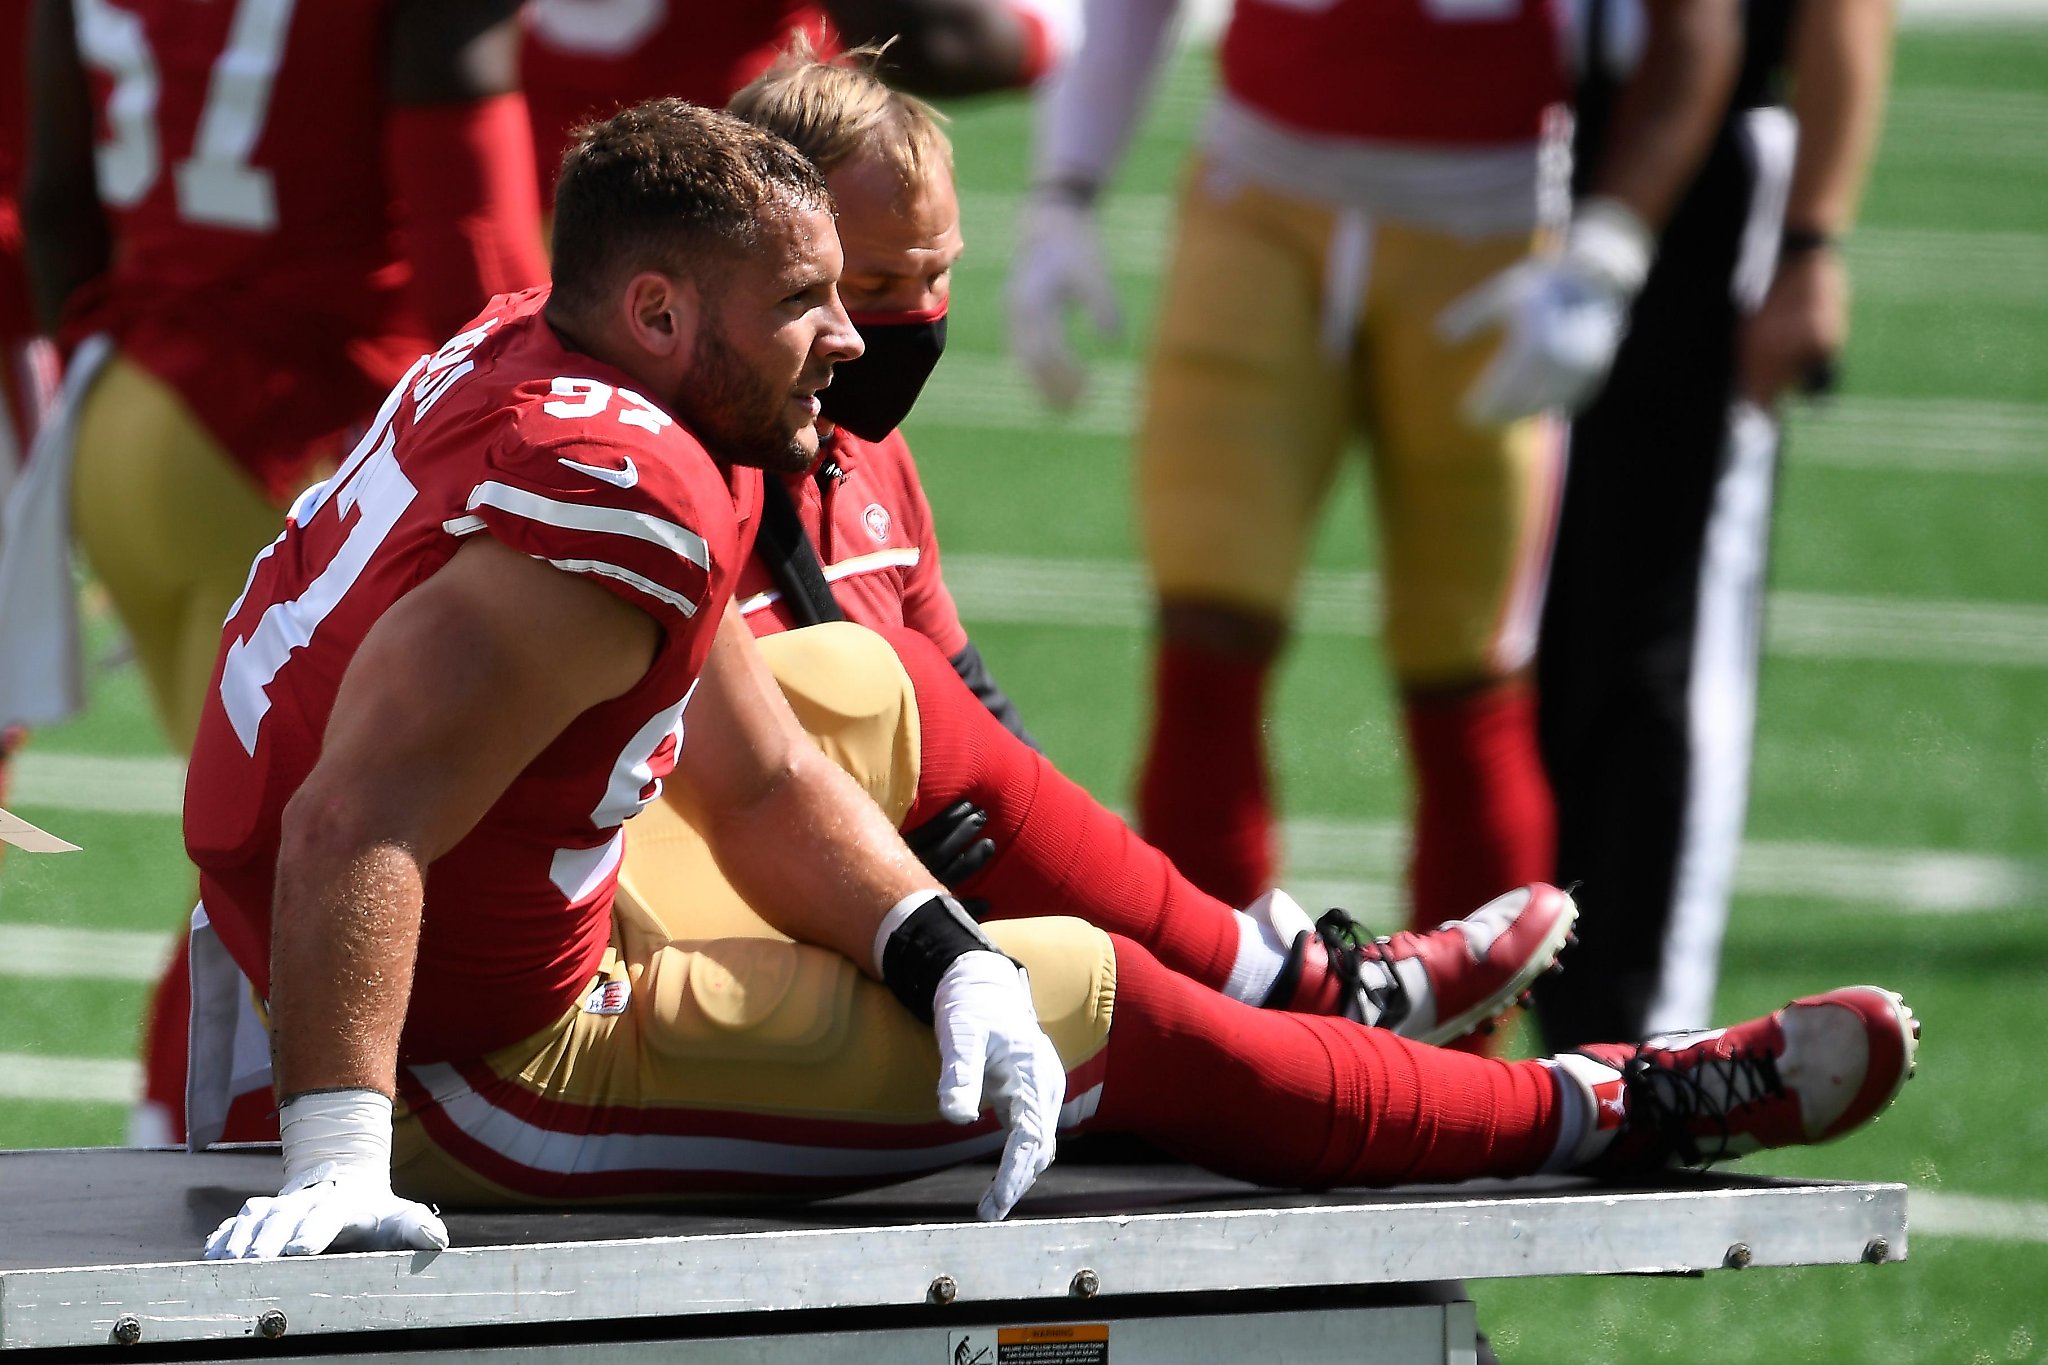 After an avalanche of injuries, Shanahan says 49ers reconsider ‘risk reward’ on players